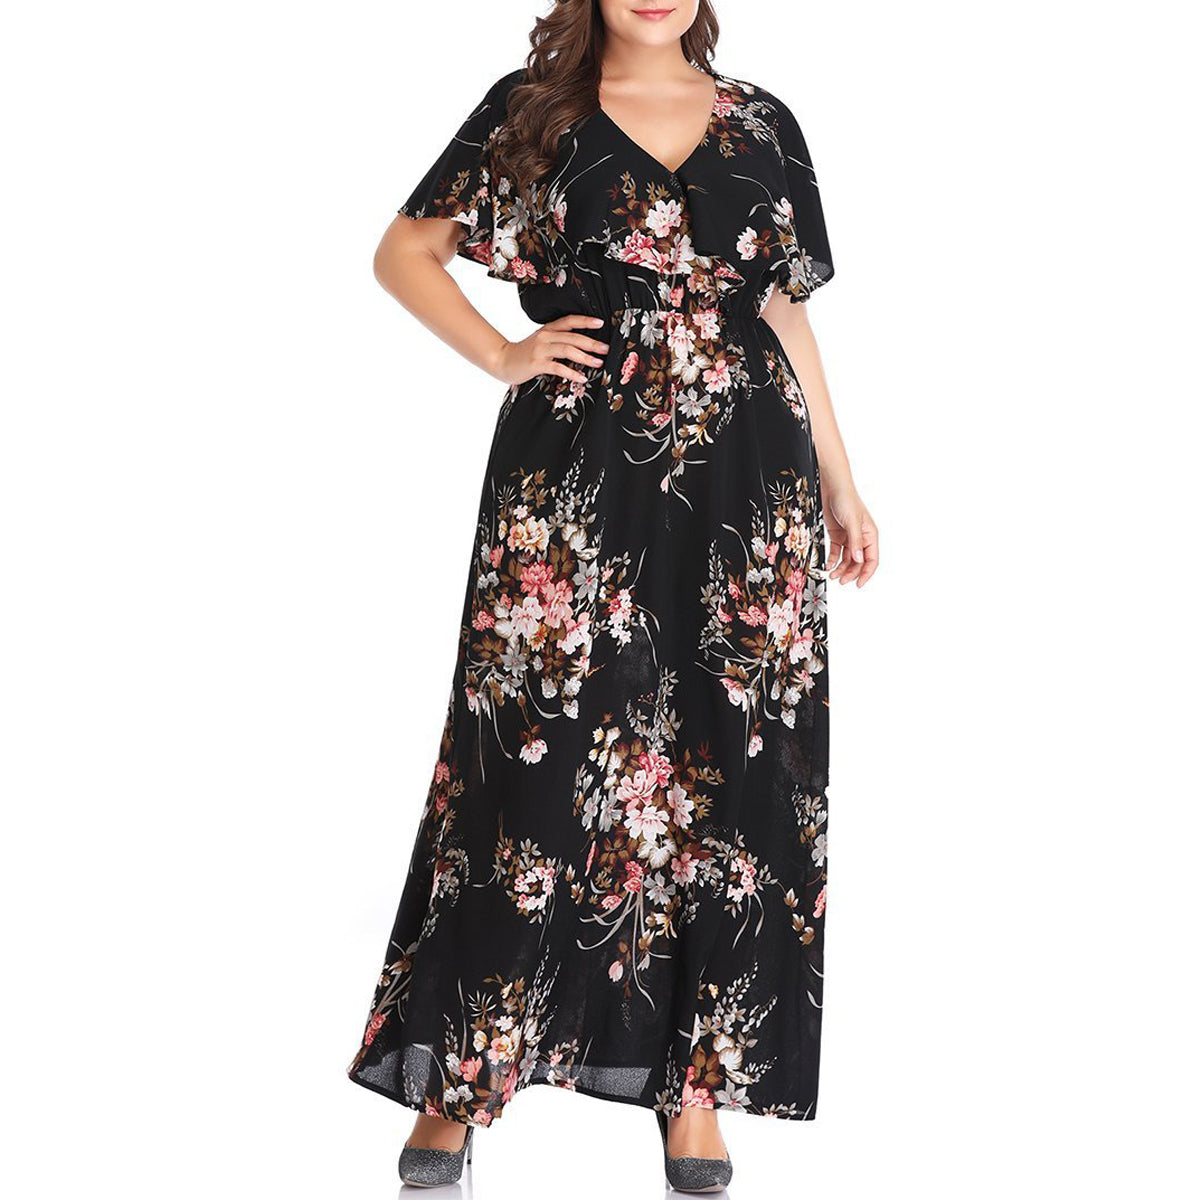 Women Black V-neck Floral Print Plus Size Maxi Dresses Evening Mother Dress Formal Party Cocktail Bridesmaid Mother of Bride Semi-Formal Beach Wedding Little Black Vacation Dress,21532,1X